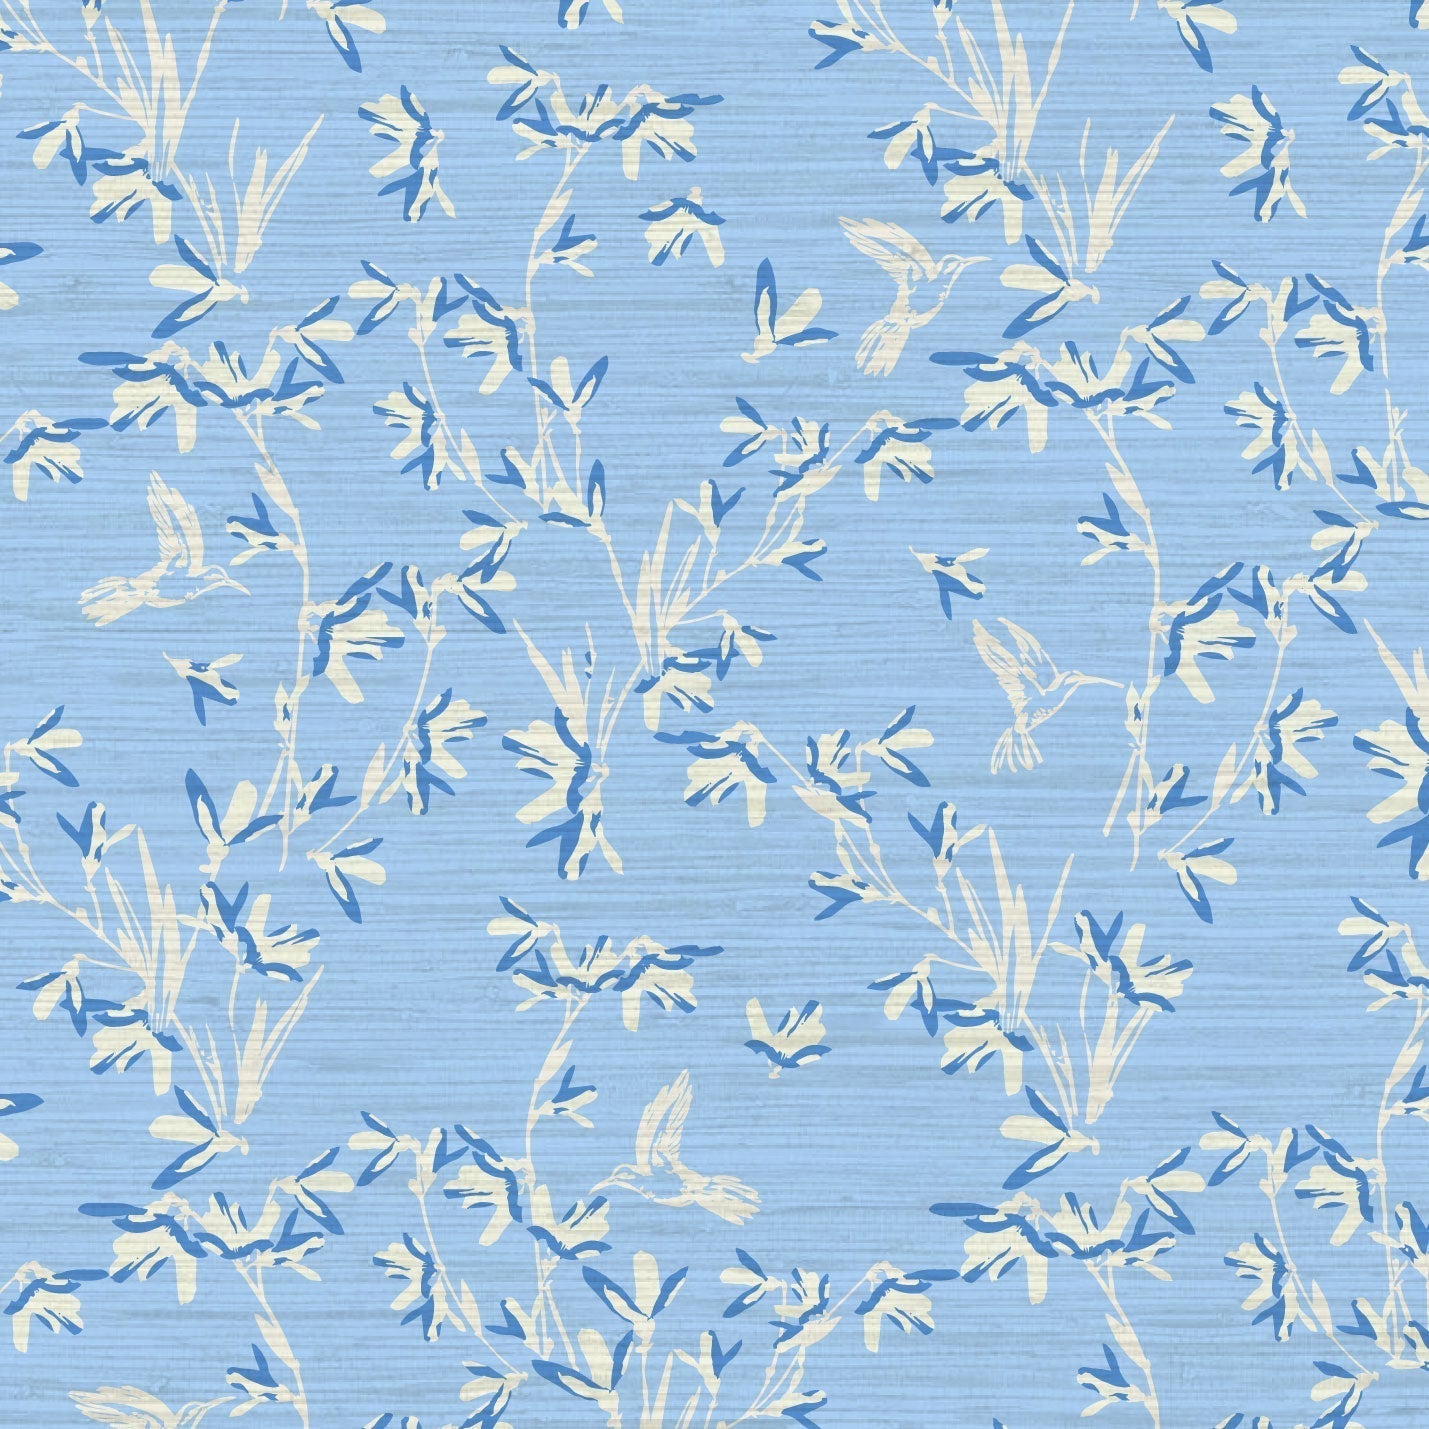 Chinoiserie Chinese Chinz Natural Textured Eco-Friendly Non-toxic High-quality  Sustainable practices Sustainability Wall covering Wallcovering Wallpaper Custom interior Bespoke Tailor-made grasscloth Nature inspired Bold Garden Wallpaper floral tree bird animal hummingbird garden tree asian inspired nursery feminine girl bedroom french blue blue light blue dusty blue 